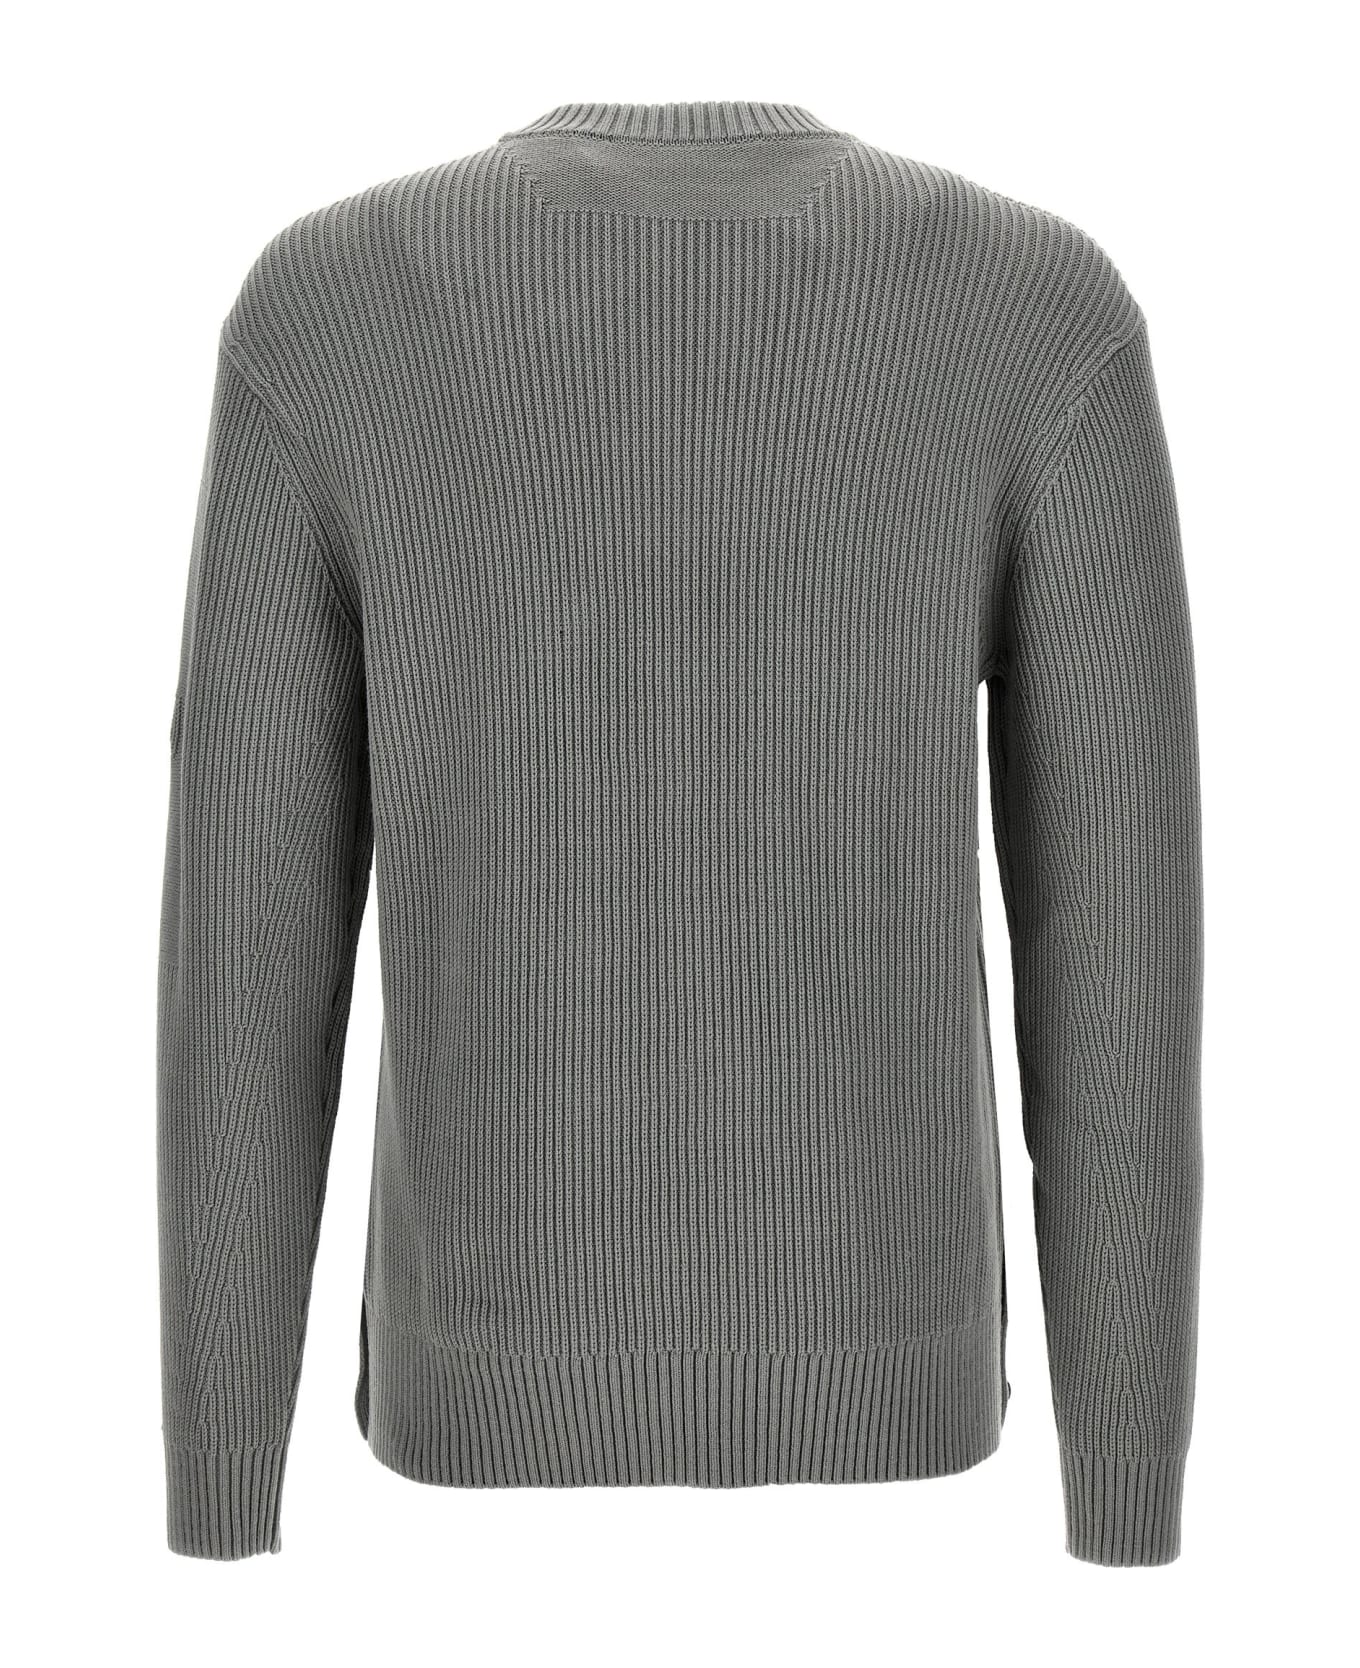 A-COLD-WALL 'fisherman' Sweater - Gray ニットウェア